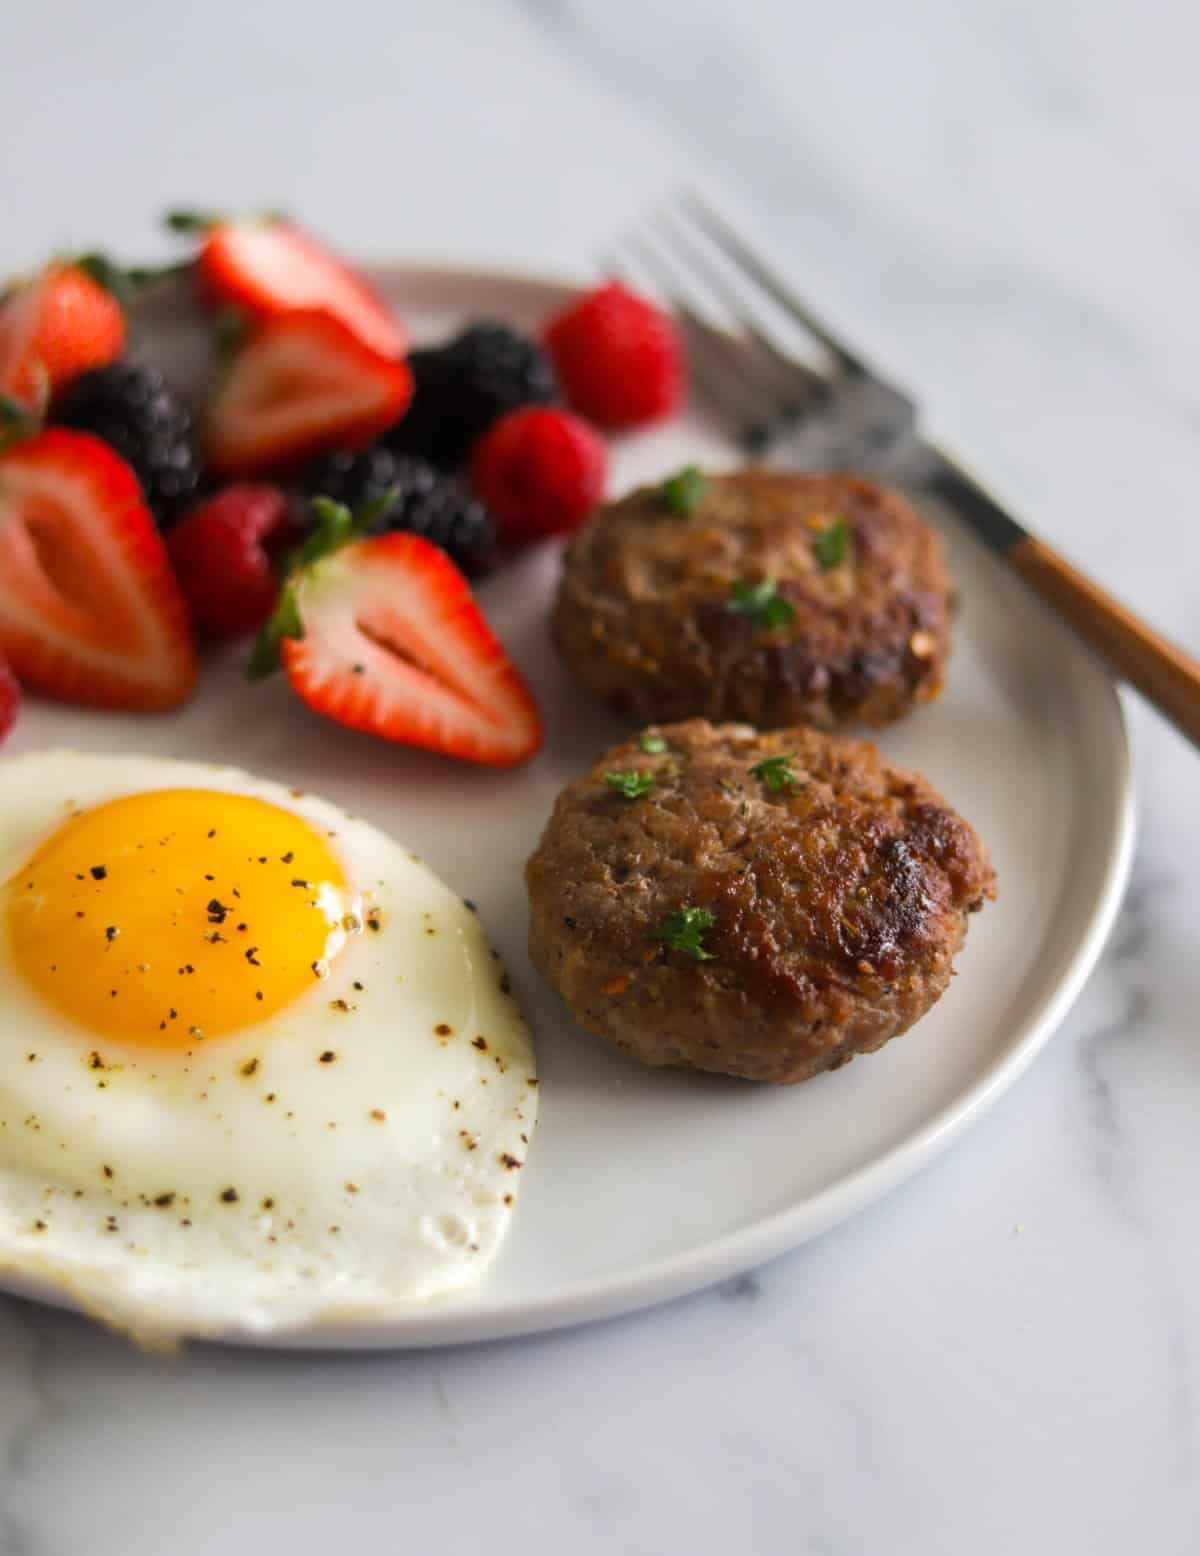 A side shot of a plate of breakfast sausage, a fried egg and berries.